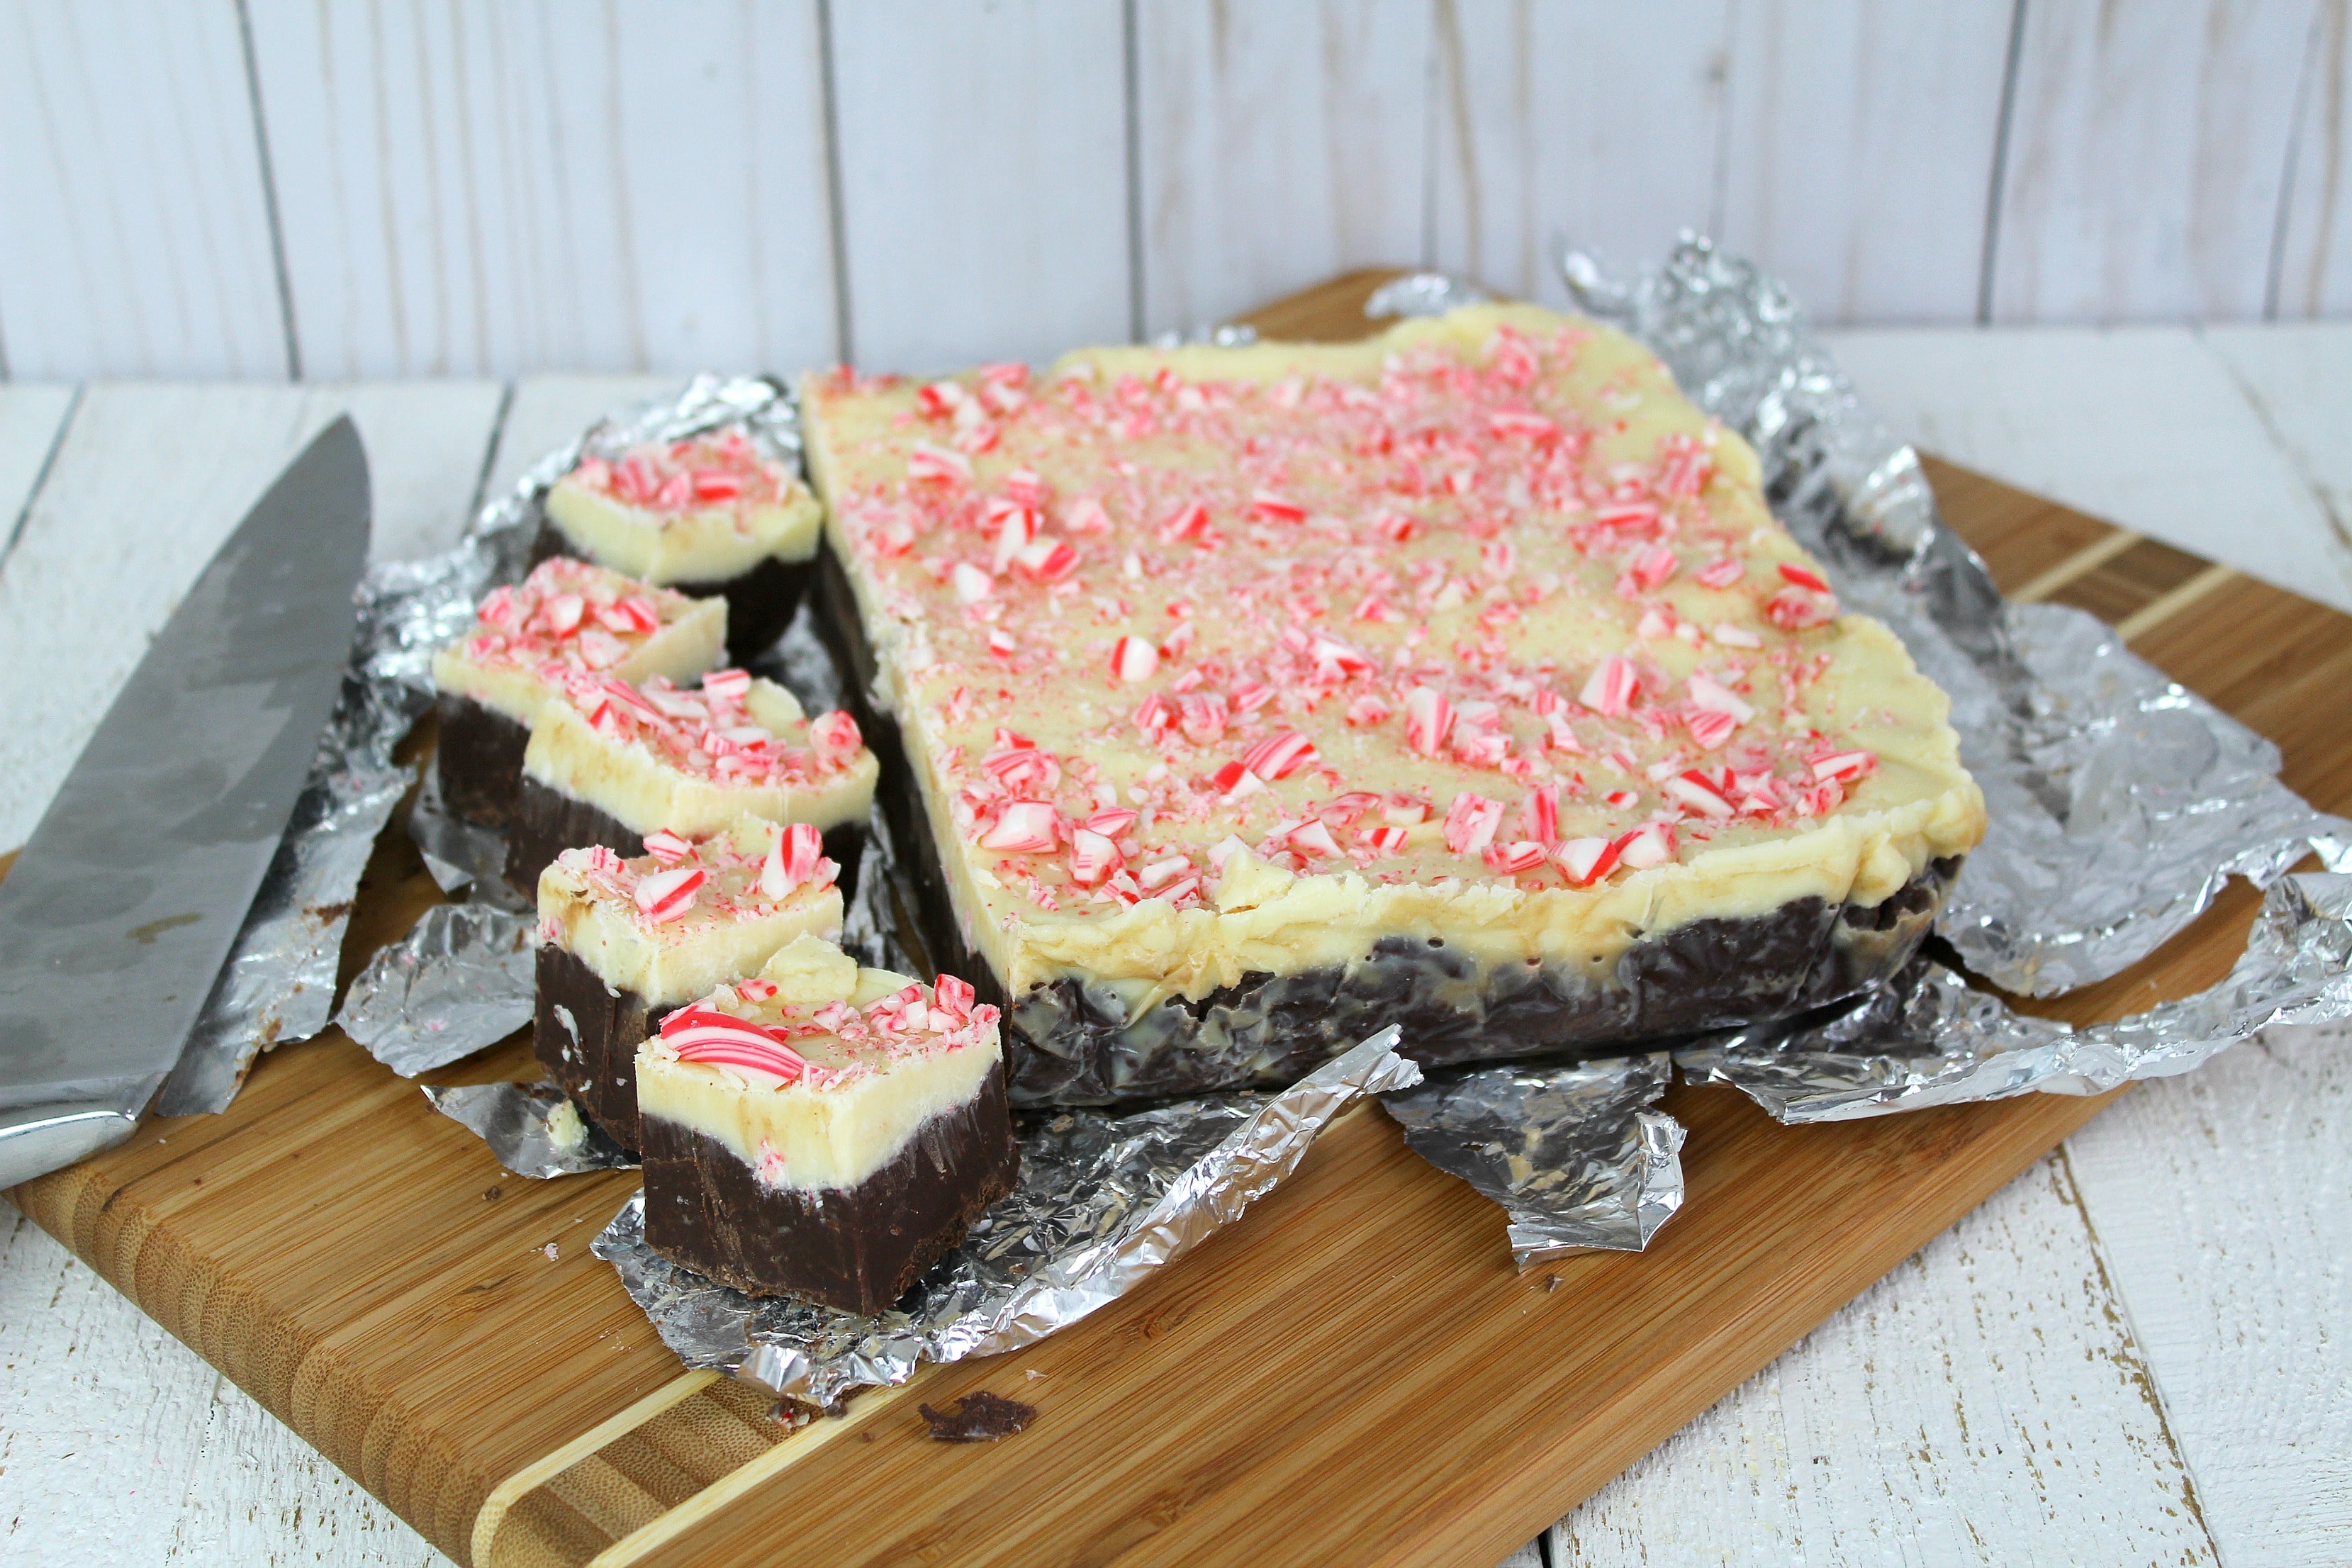 The last step of this Easy Peppermint Bark Fudge is to cool in the refrigerator, cut, and enjoy!